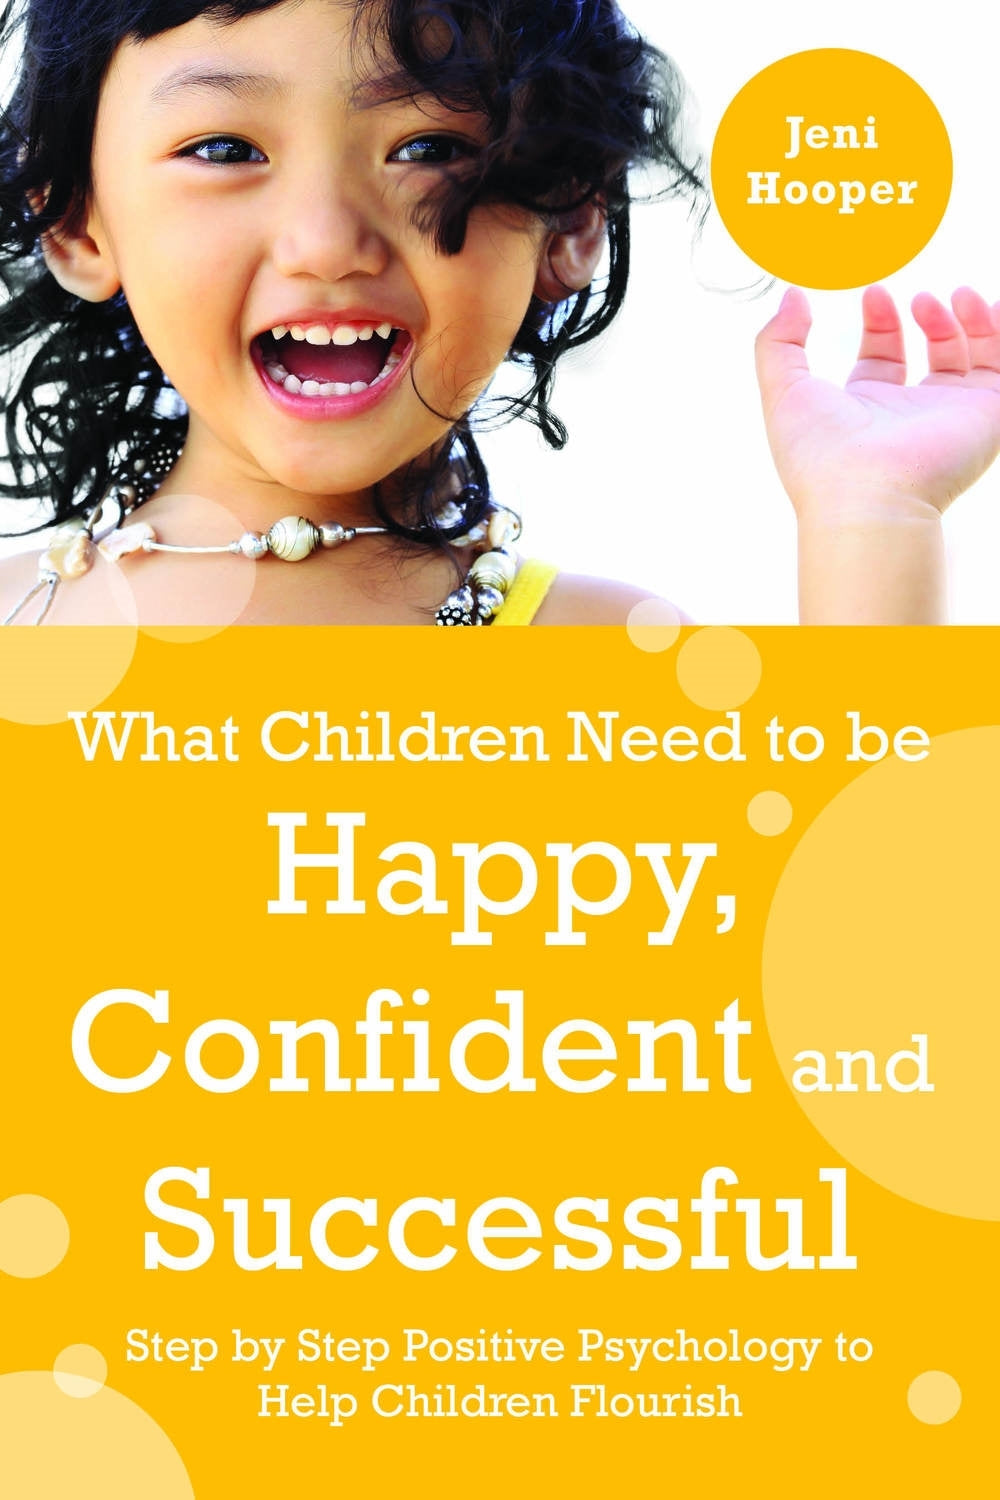 What Children Need to Be Happy, Confident and Successful by Jeni Hooper